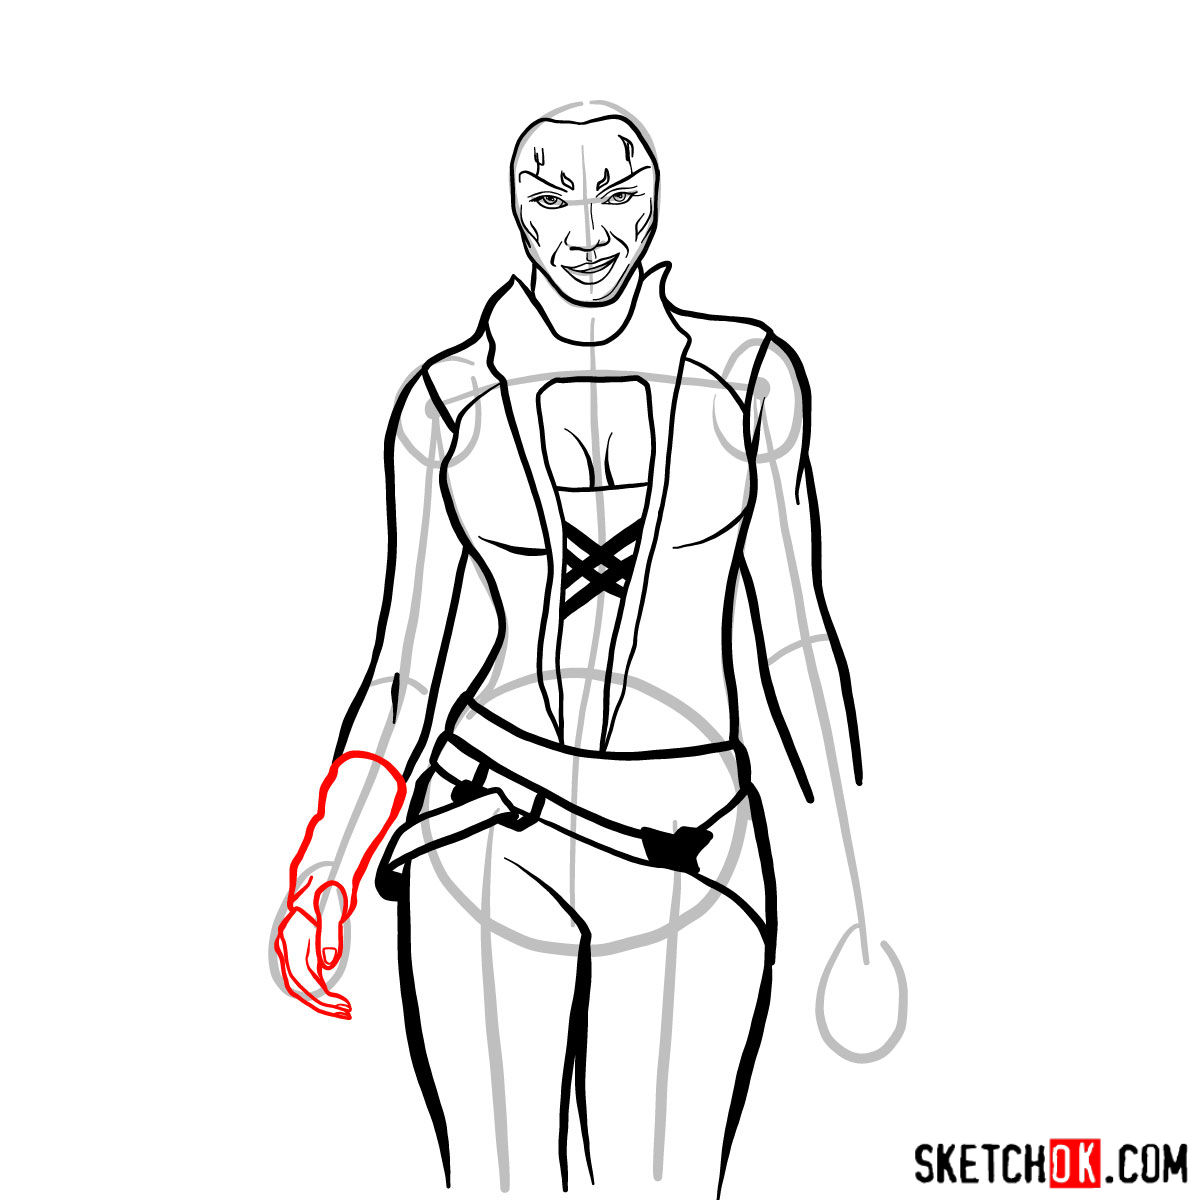 How to draw Gamora from Guardians of the Galaxy - step 10